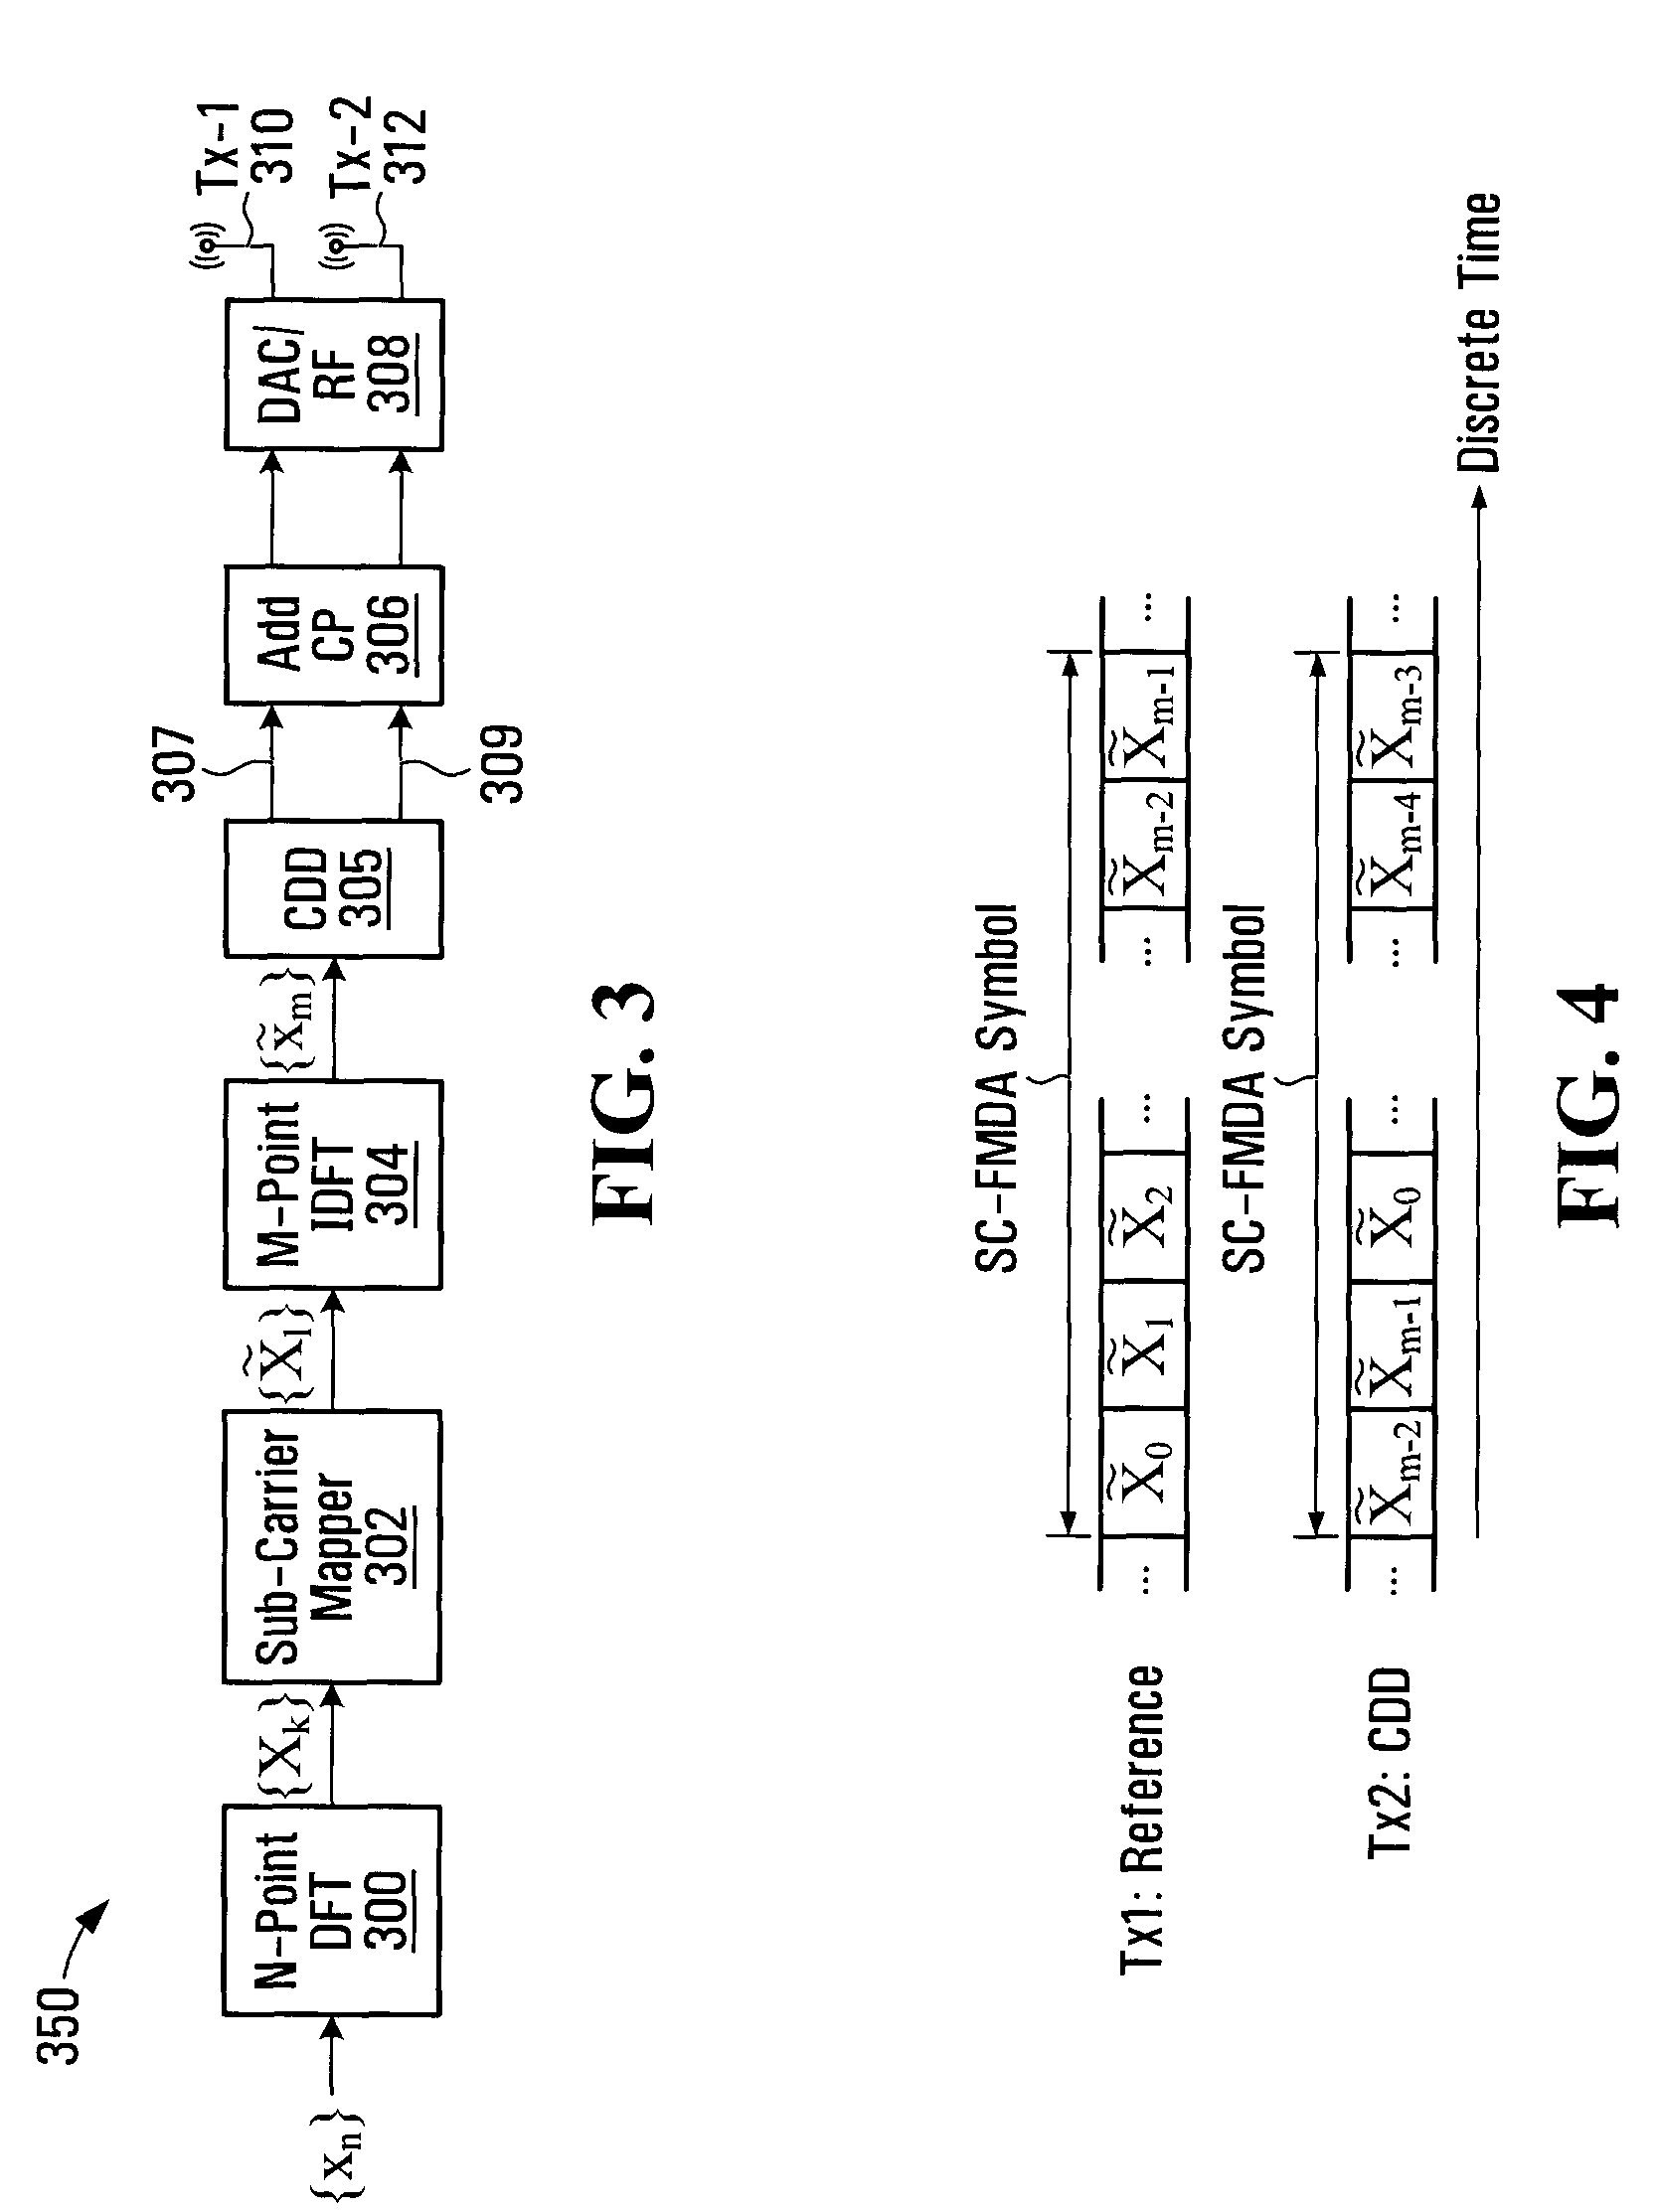 Systems and methods for sc-fdma transmission diversity